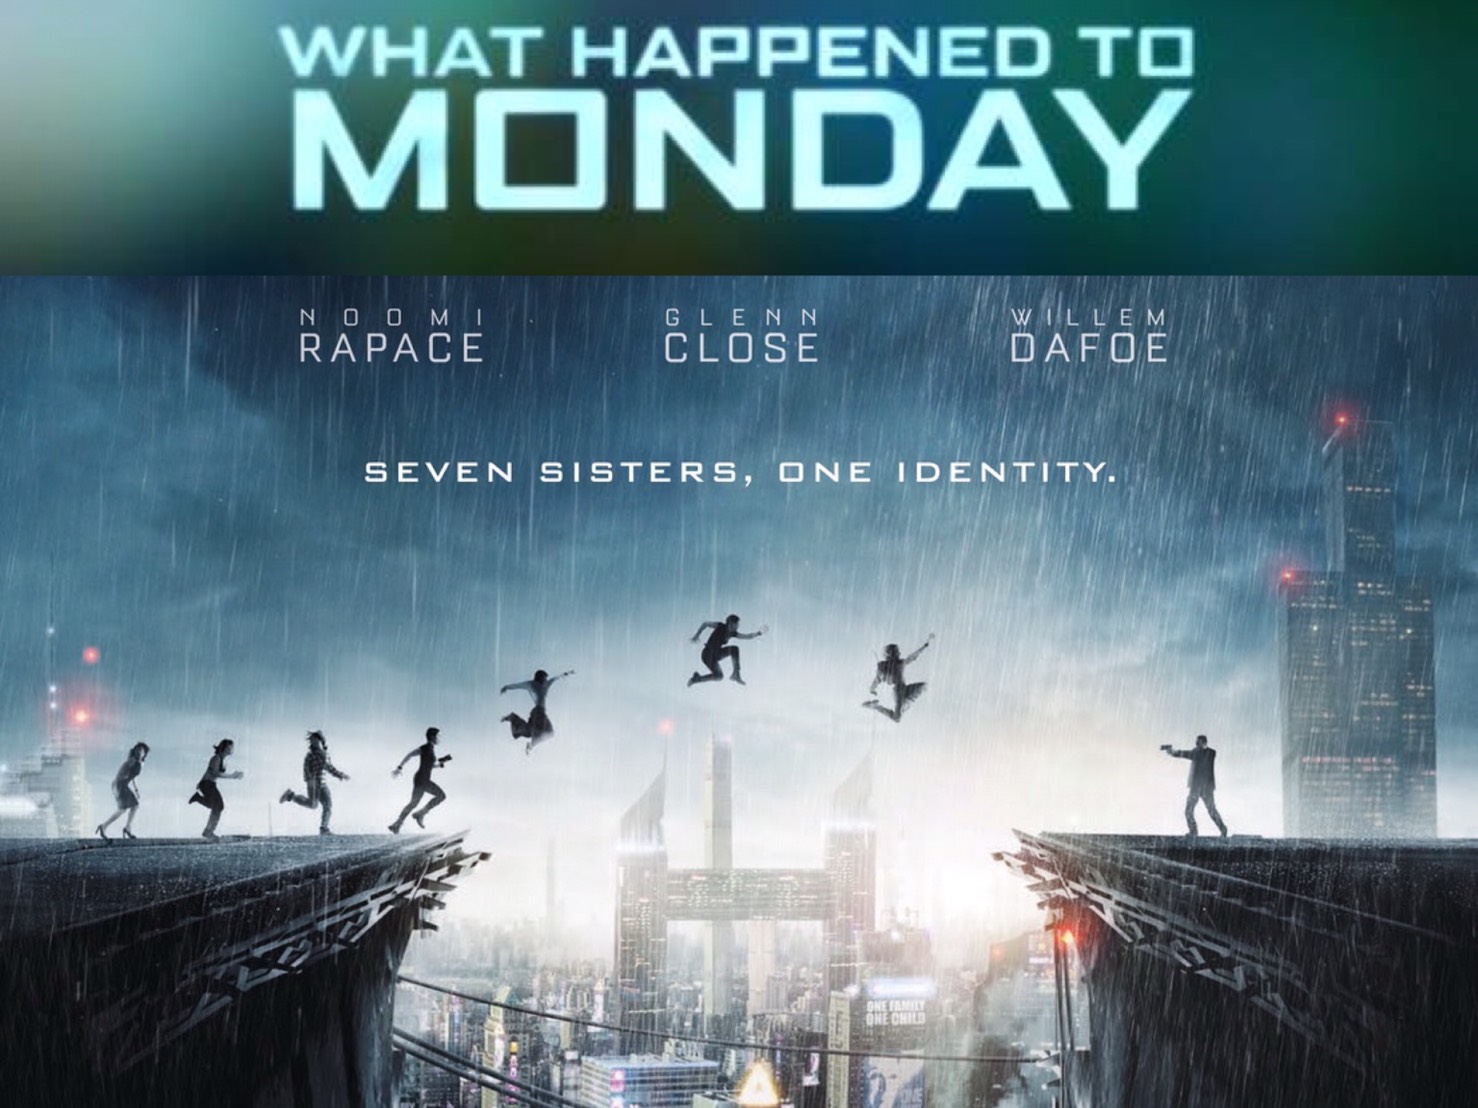 POTPET: WHAT HAPPENED TO MONDAY